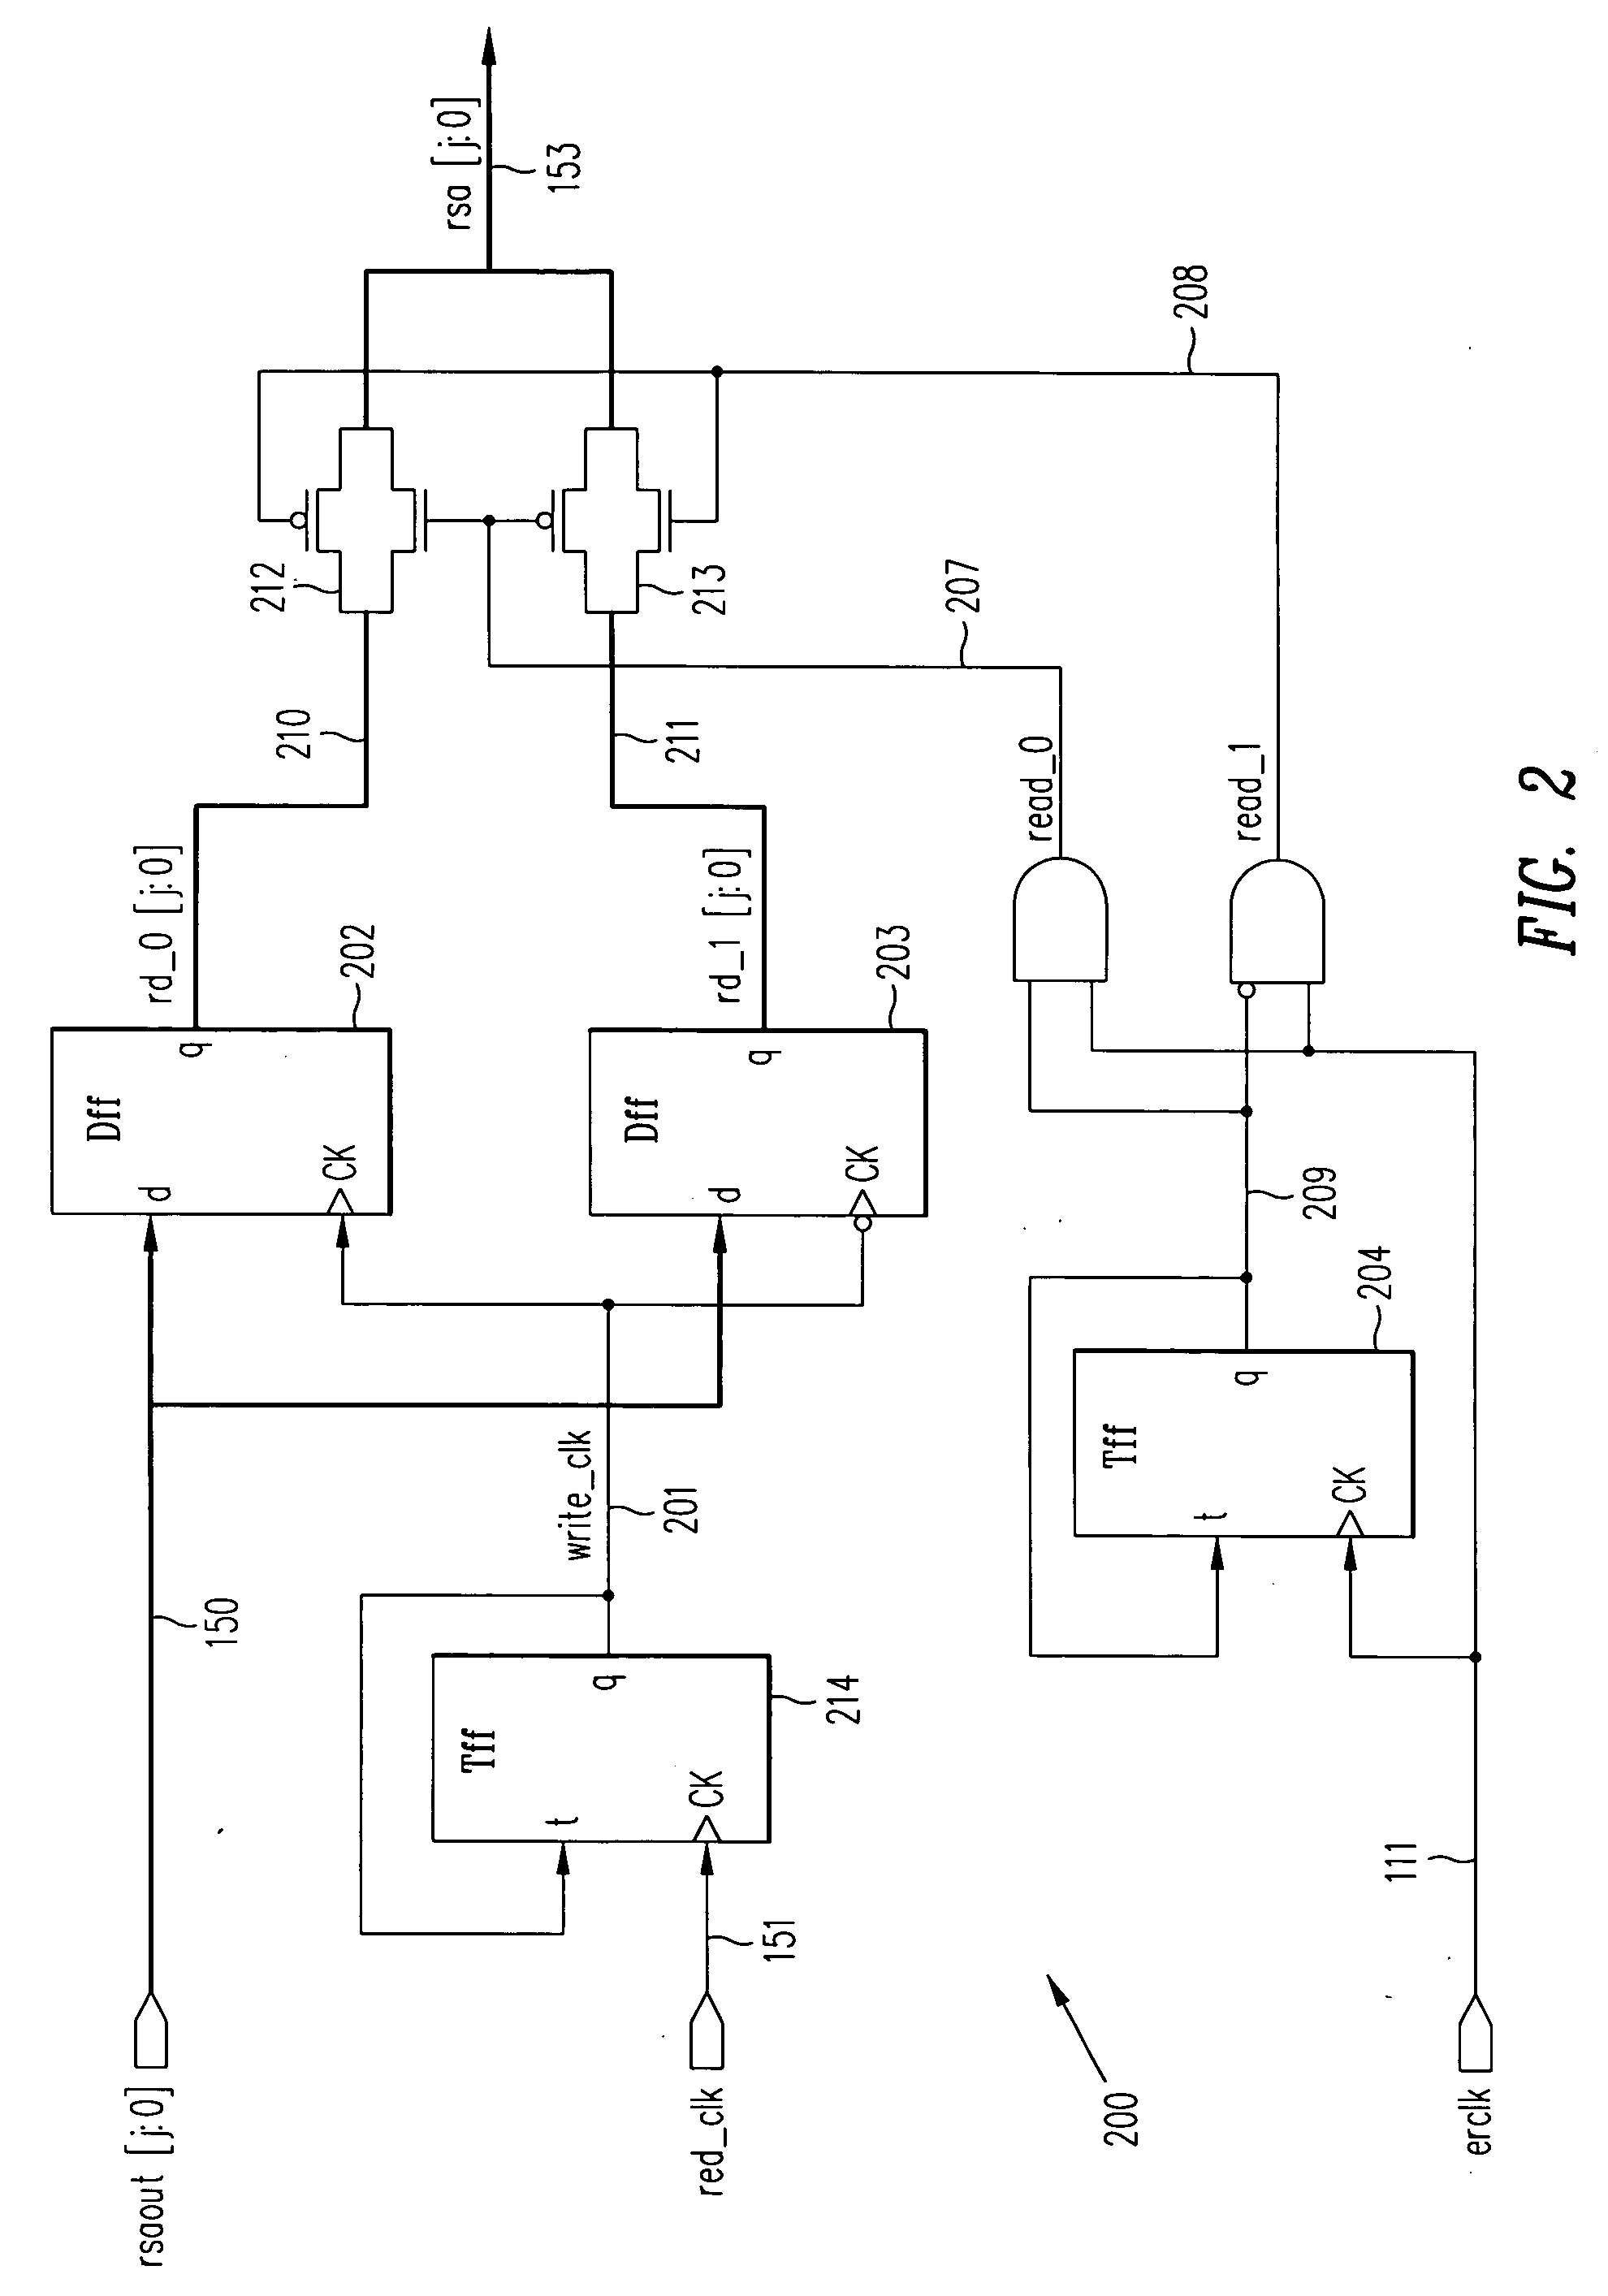 System and method for providing a redundant memory array in a semiconductor memory integrated circuit